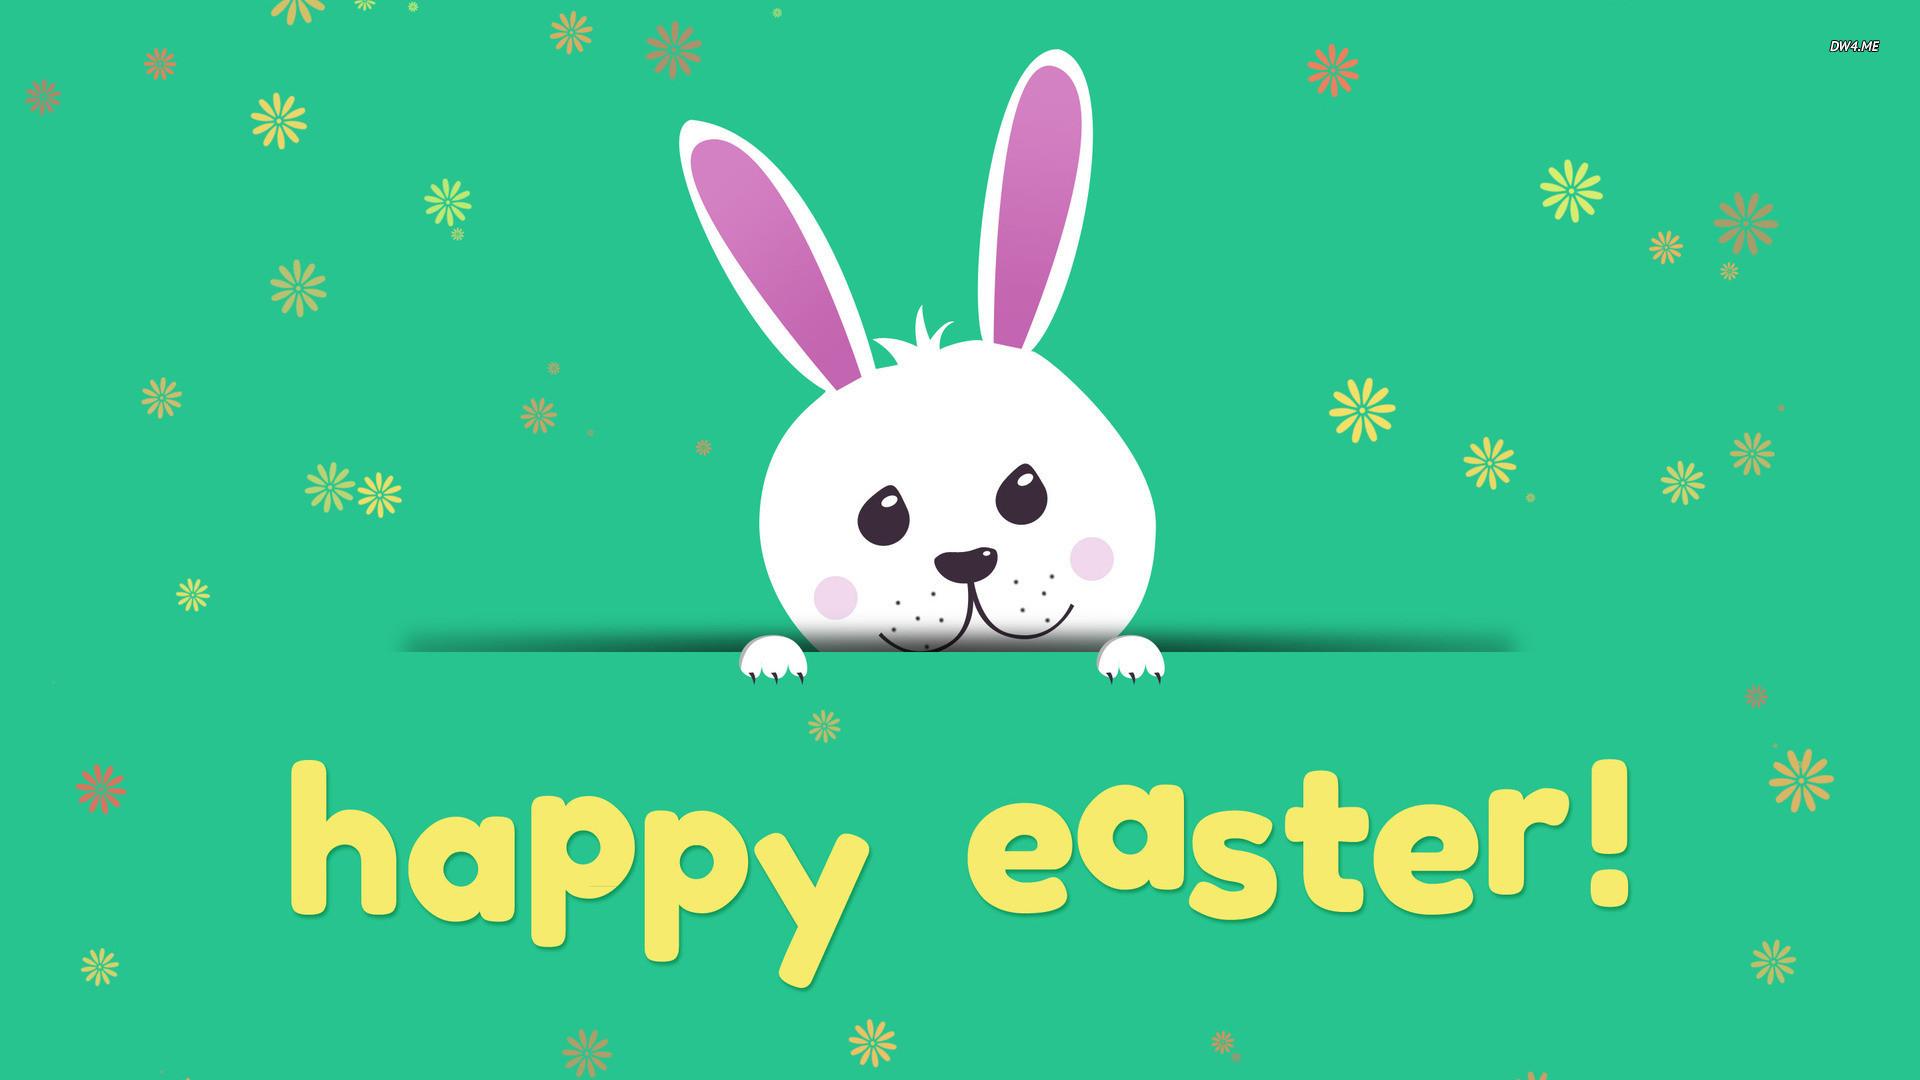 Green Cute Easter Background Wallpaper Image For Free Download  Pngtree